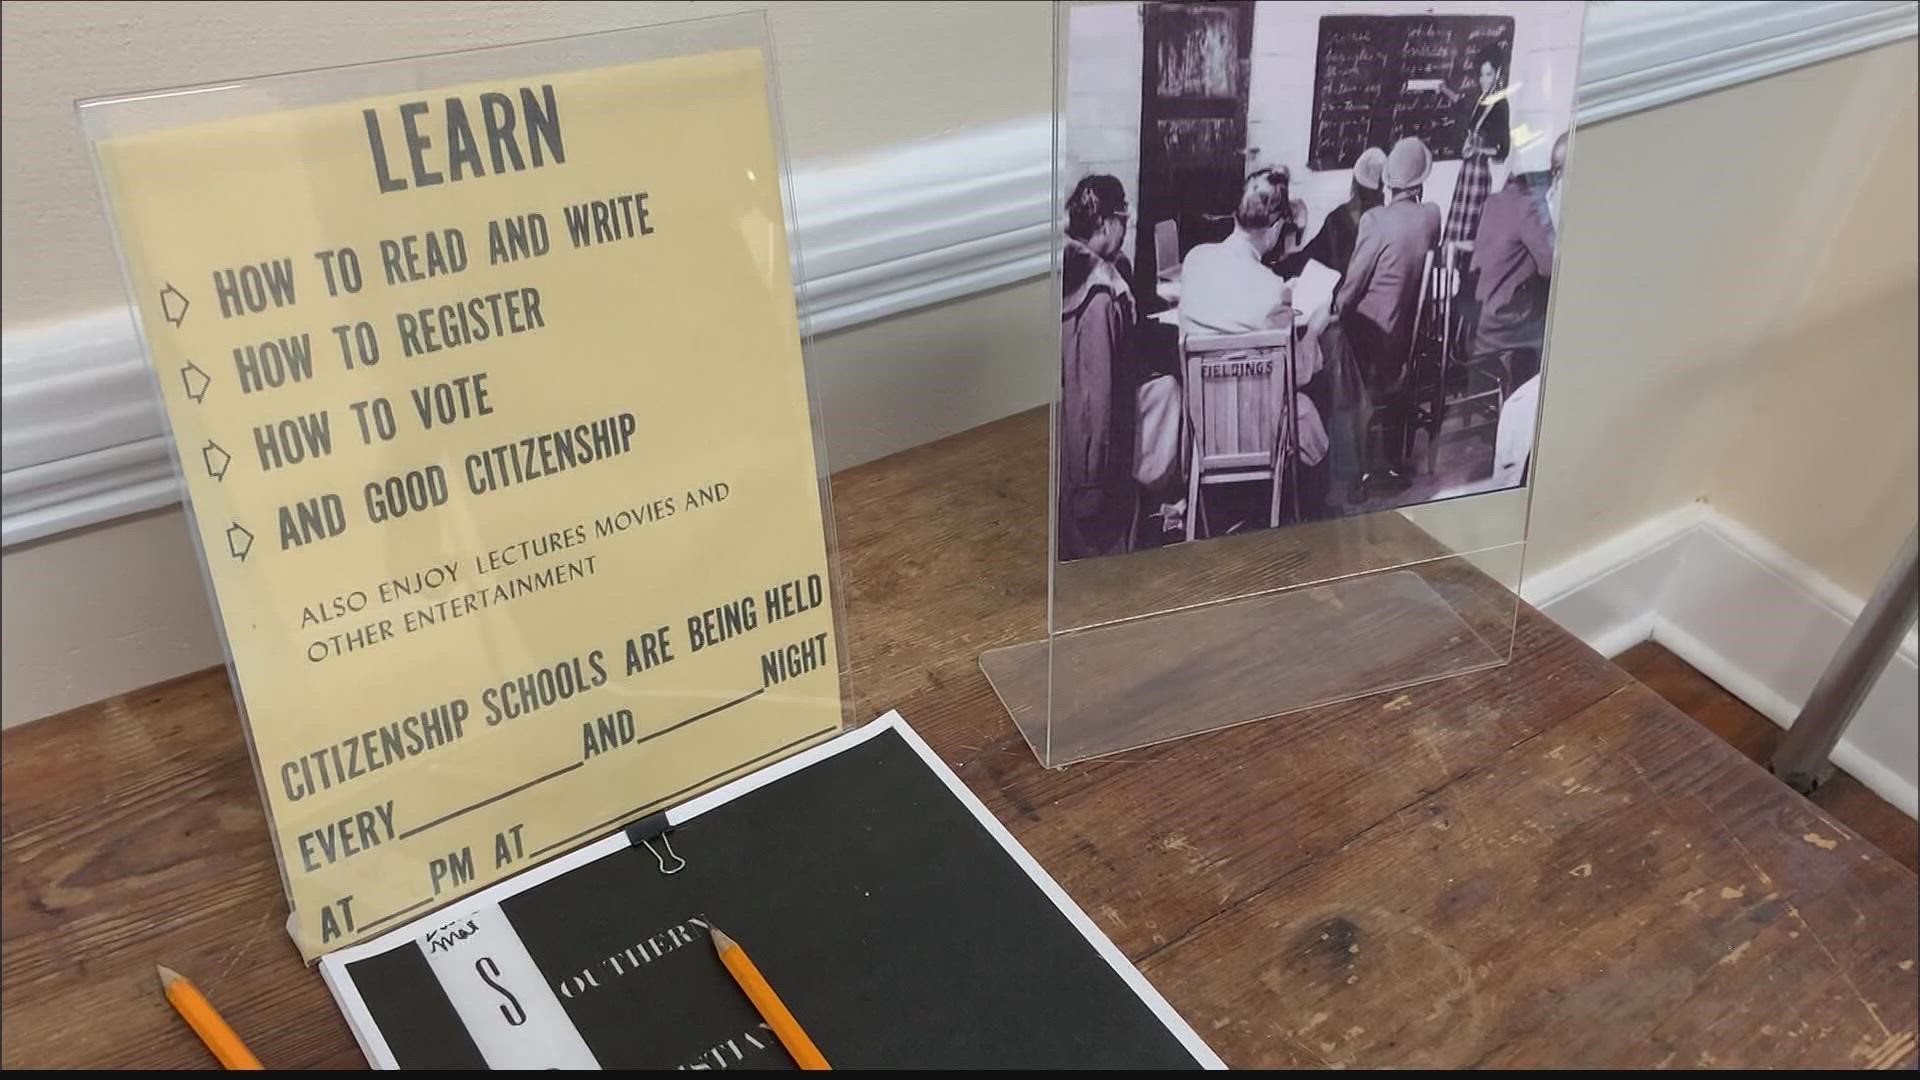 A bit of obscure civil rights history begins in a south Georgia community that was central to some of the movement's most important moments in the 60's.